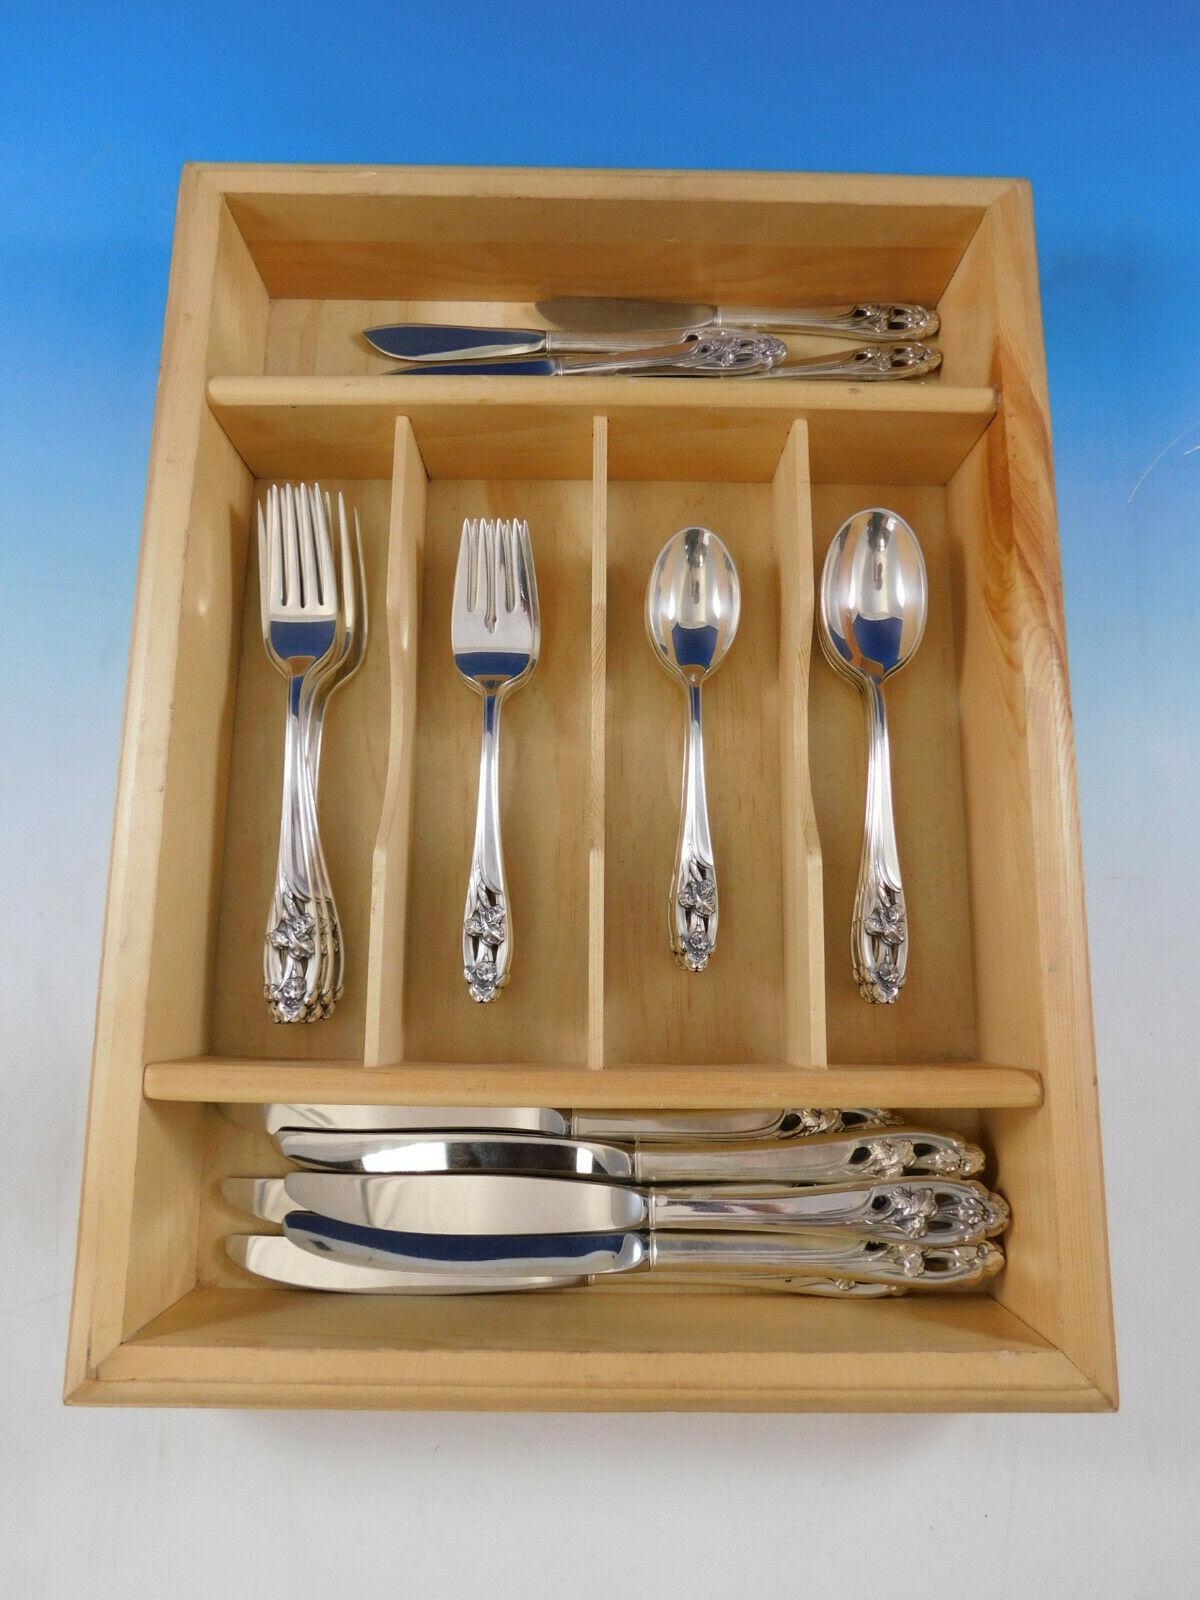 Silver Iris by International sterling silver pierced handle flatware set - 36 pieces. Great starter set! This set includes:

6 knives, 9 1/4